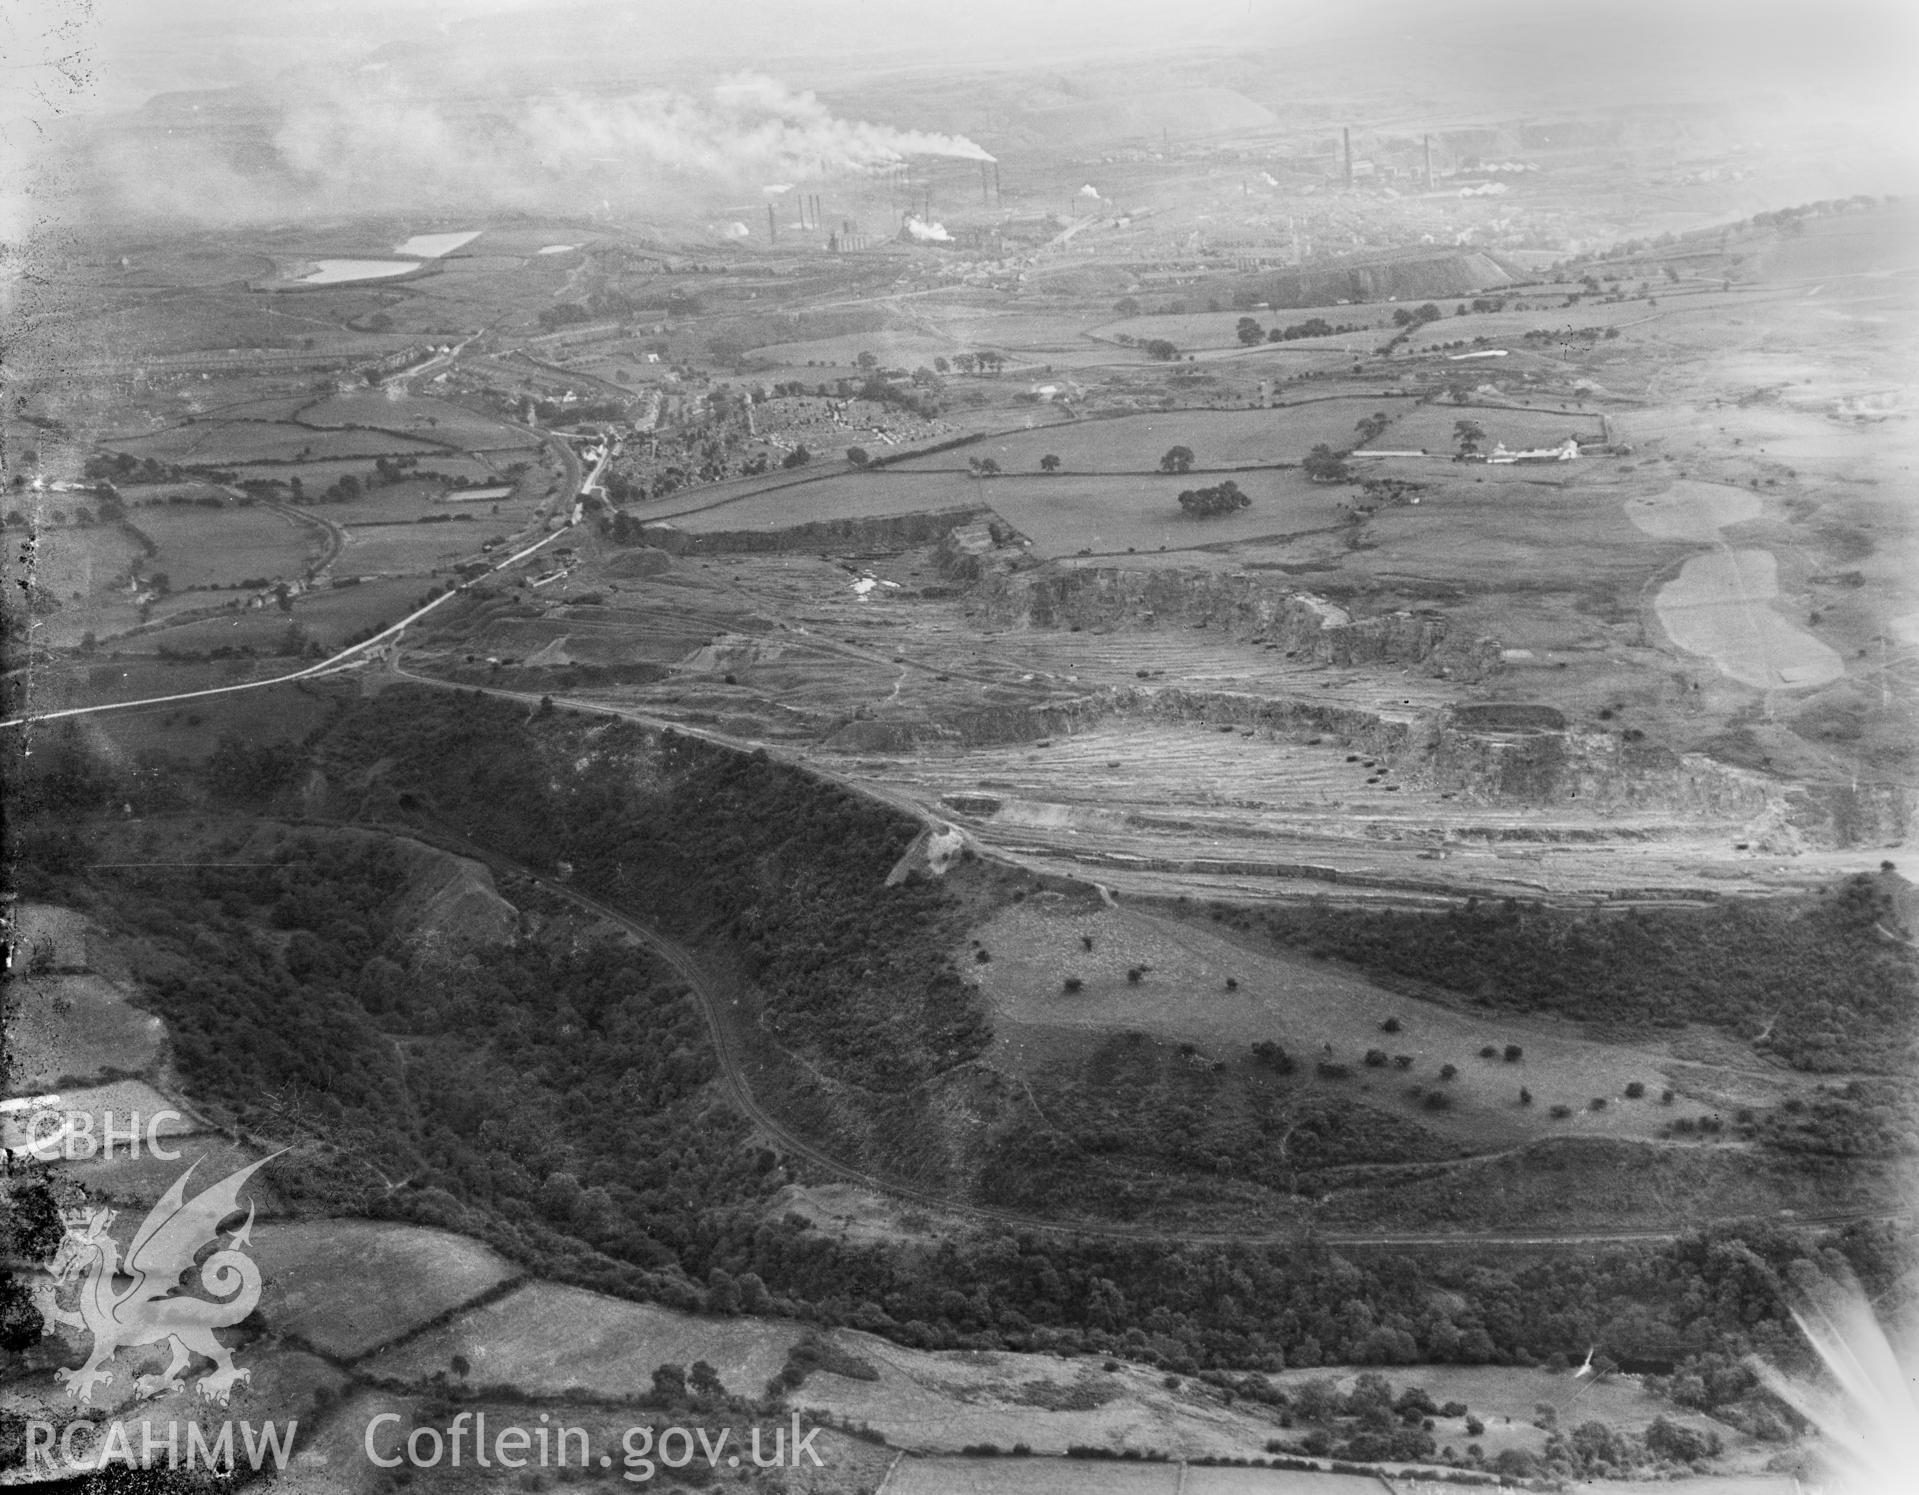 View of Distant view of Guest, Keen  & Nettlefold, Dowlais Works Merthyr Tydfil, oblique aerial view. 5?x4? black and white glass plate negative.